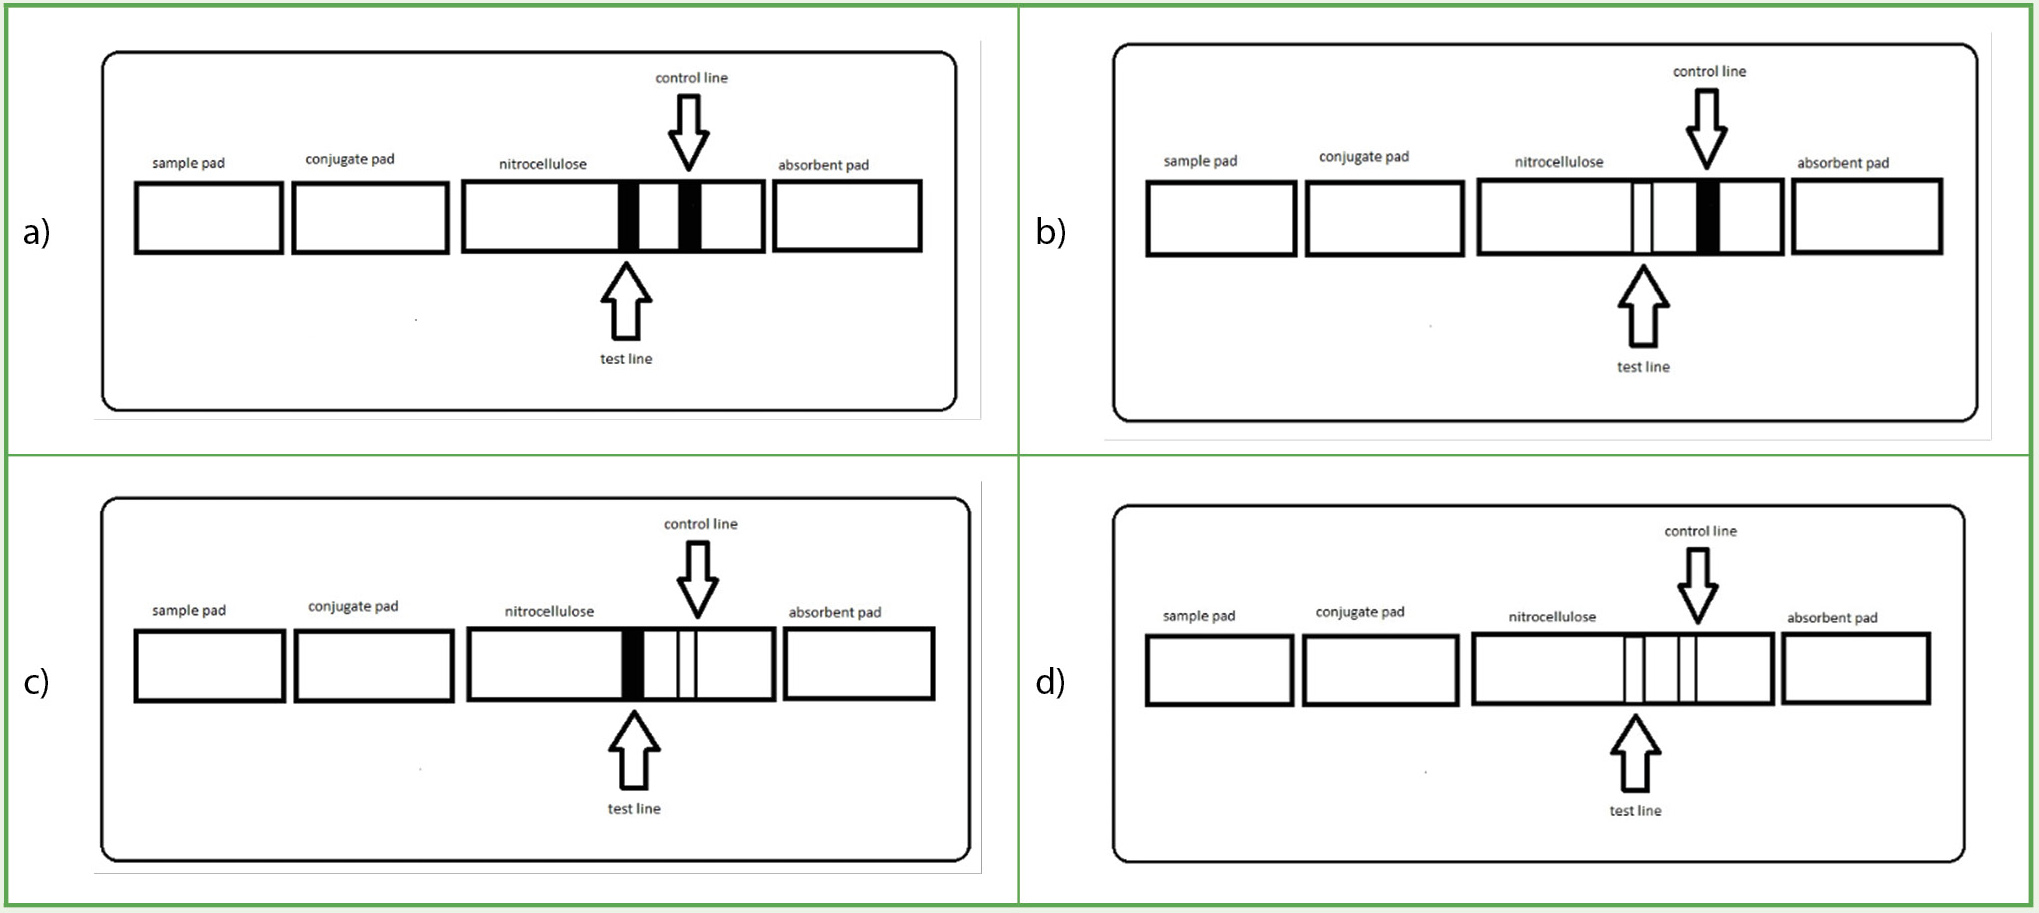 A visual representation of the various combinations possible in a lateral flow assay.